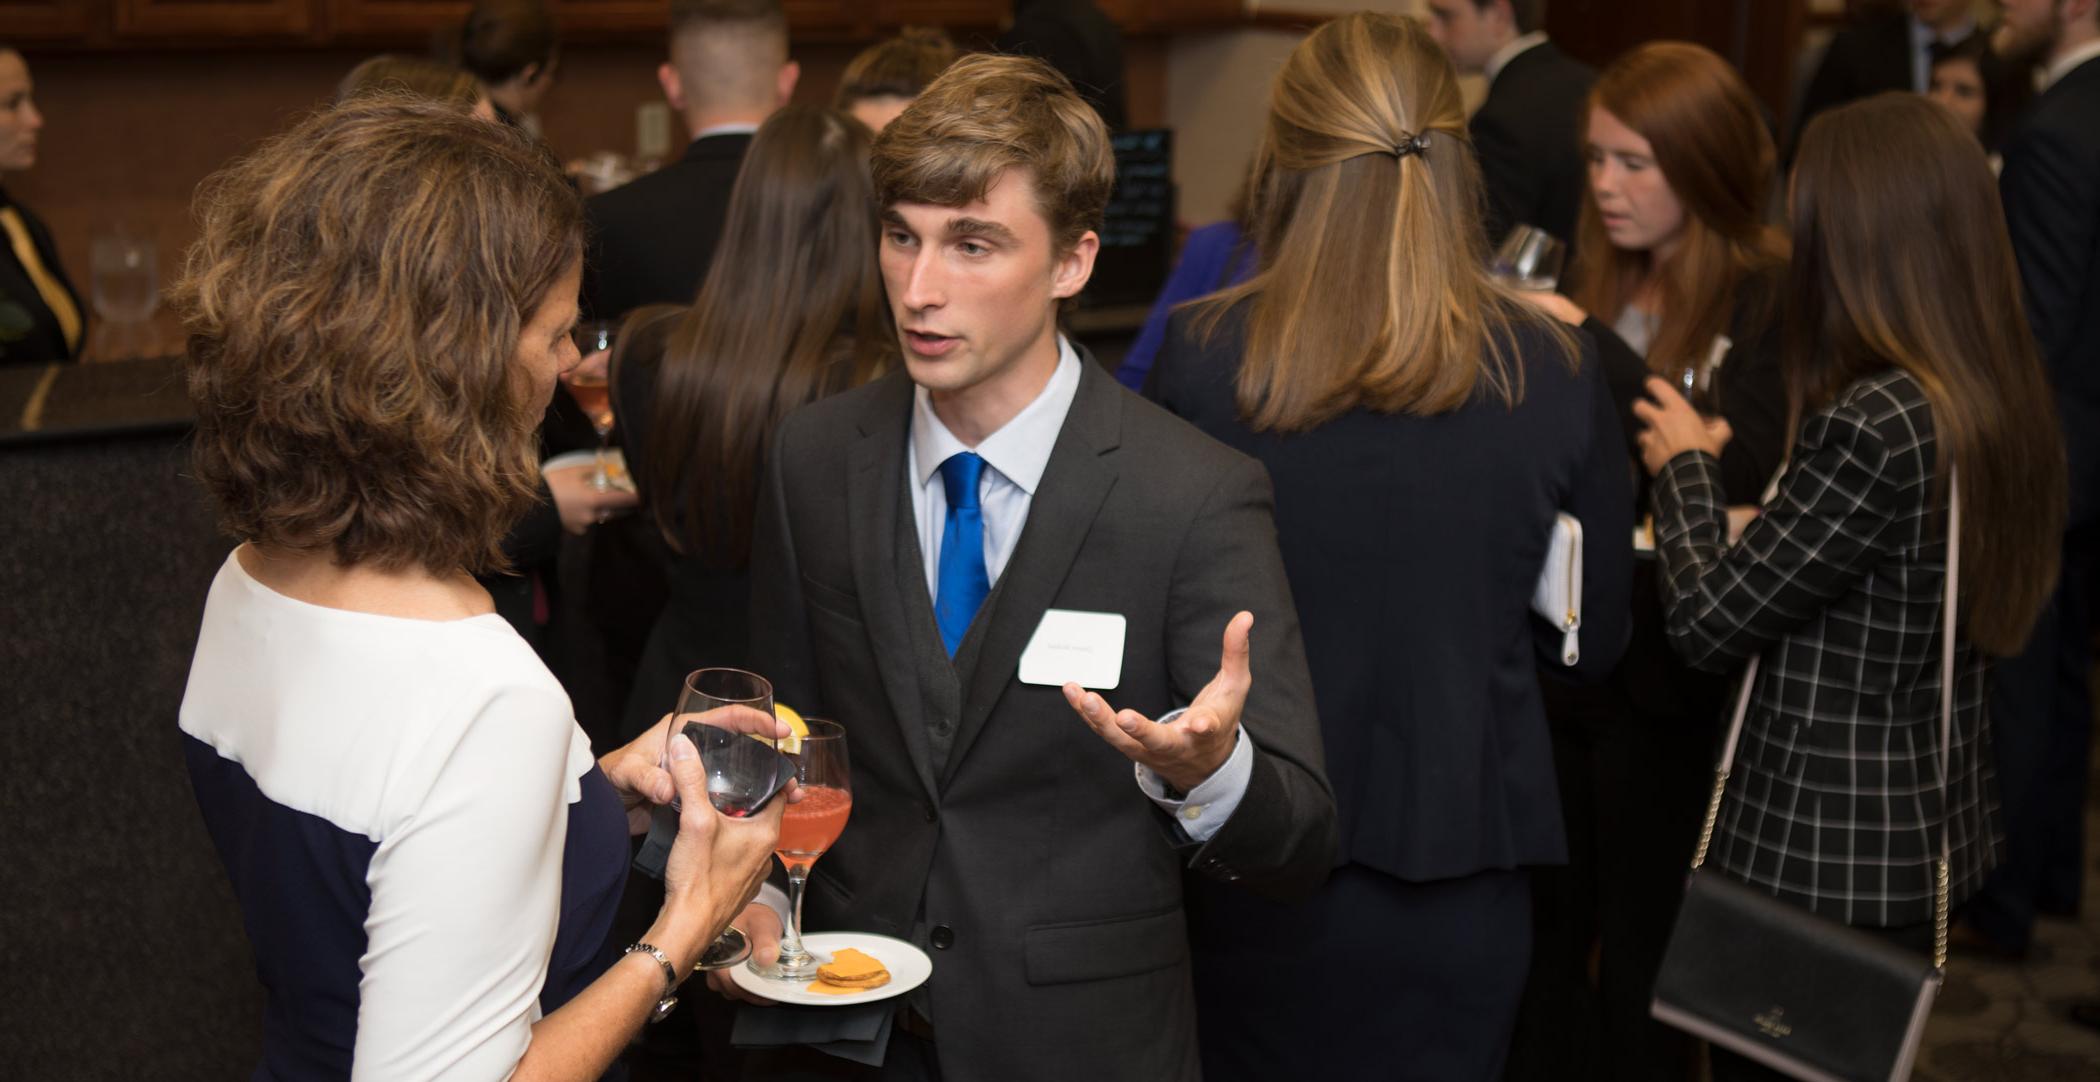 Patty Navin speaks with Graeson Michaud. Ohio Northern University Dicke College of Business Administration juniors participated in an etiquette dinner at The Inn at Ohio Northern University.